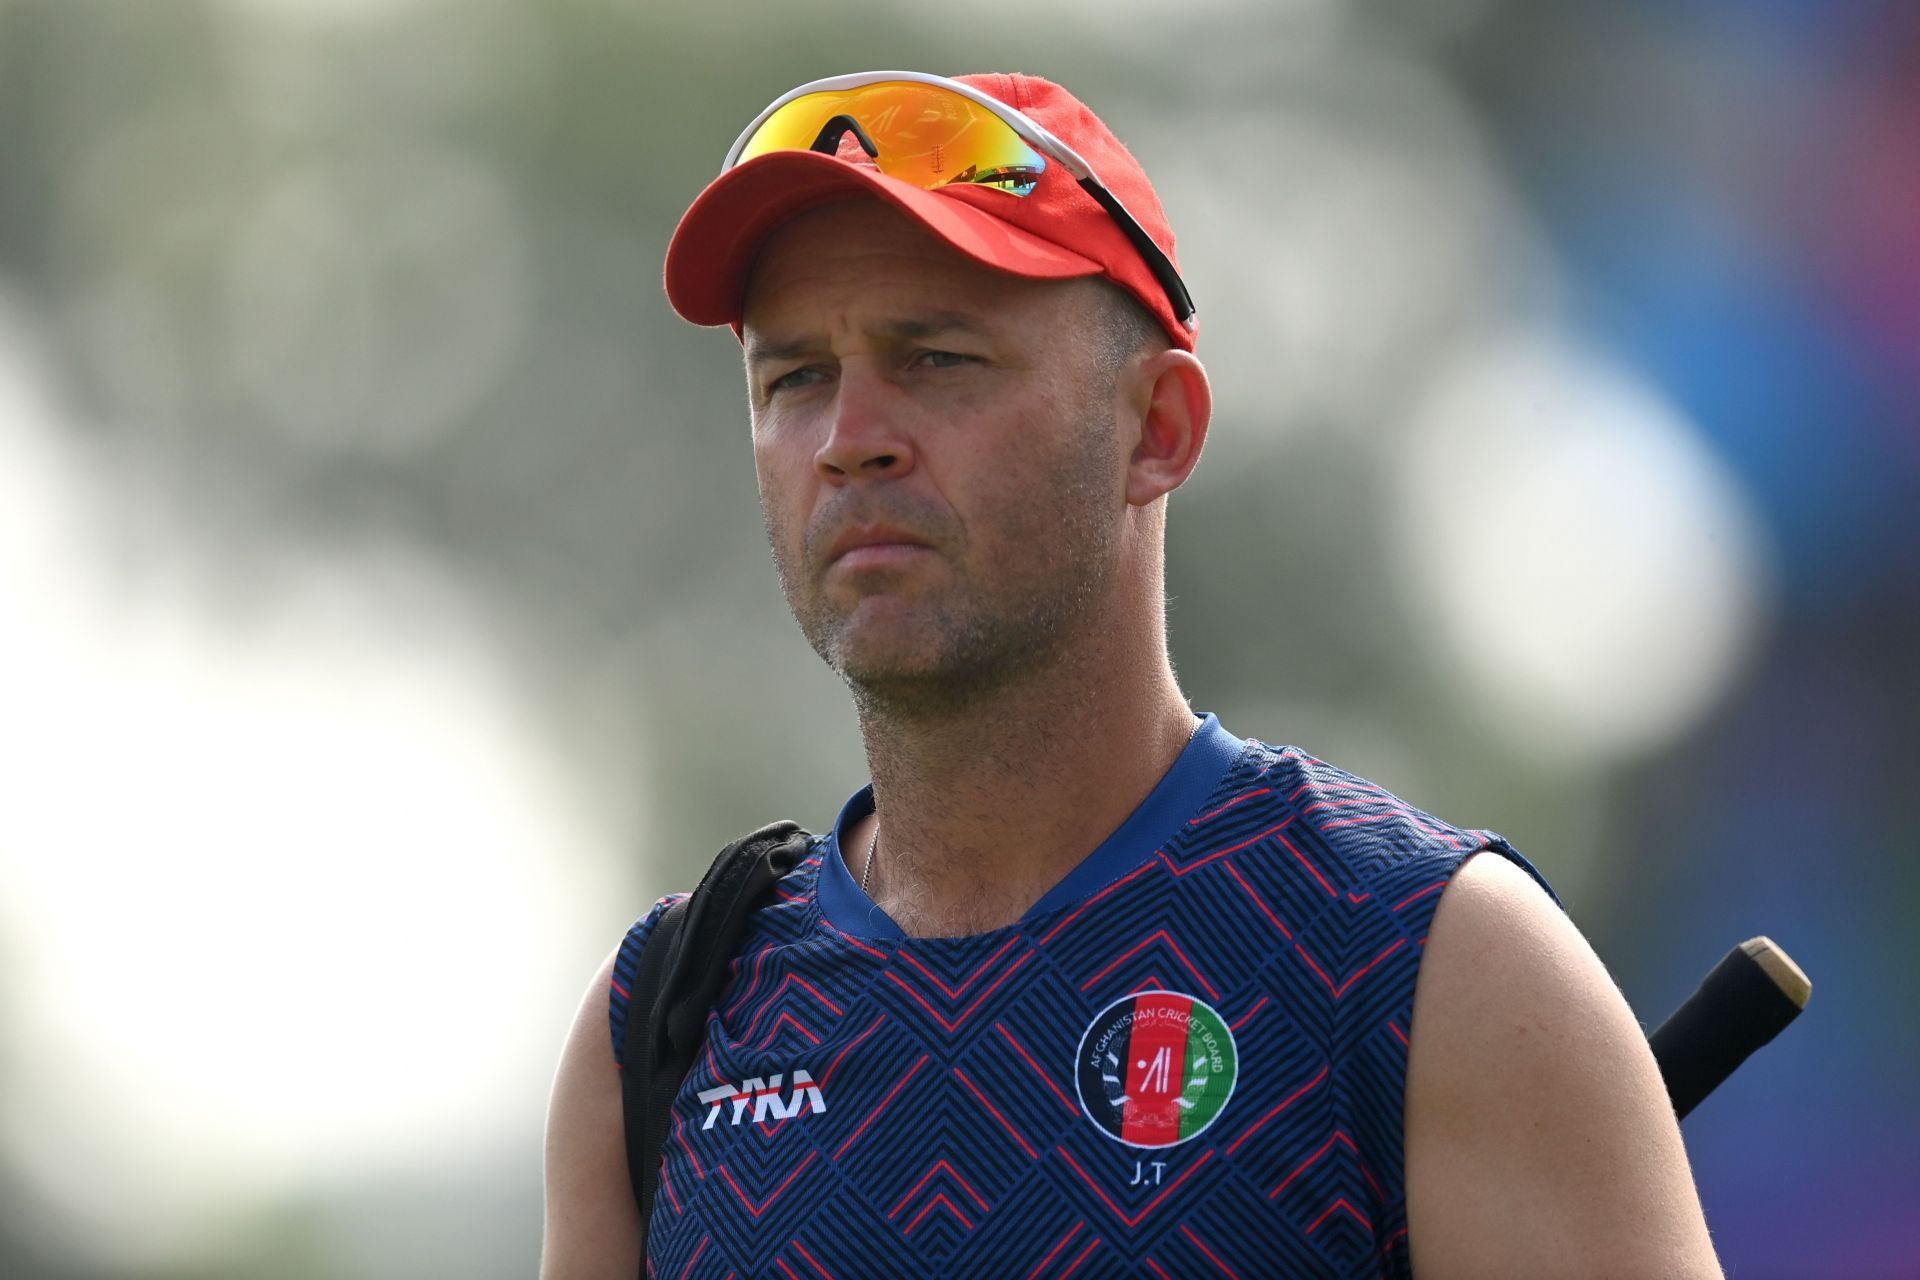 Jonathan Trott seems to have made a real impact on Afghanistan